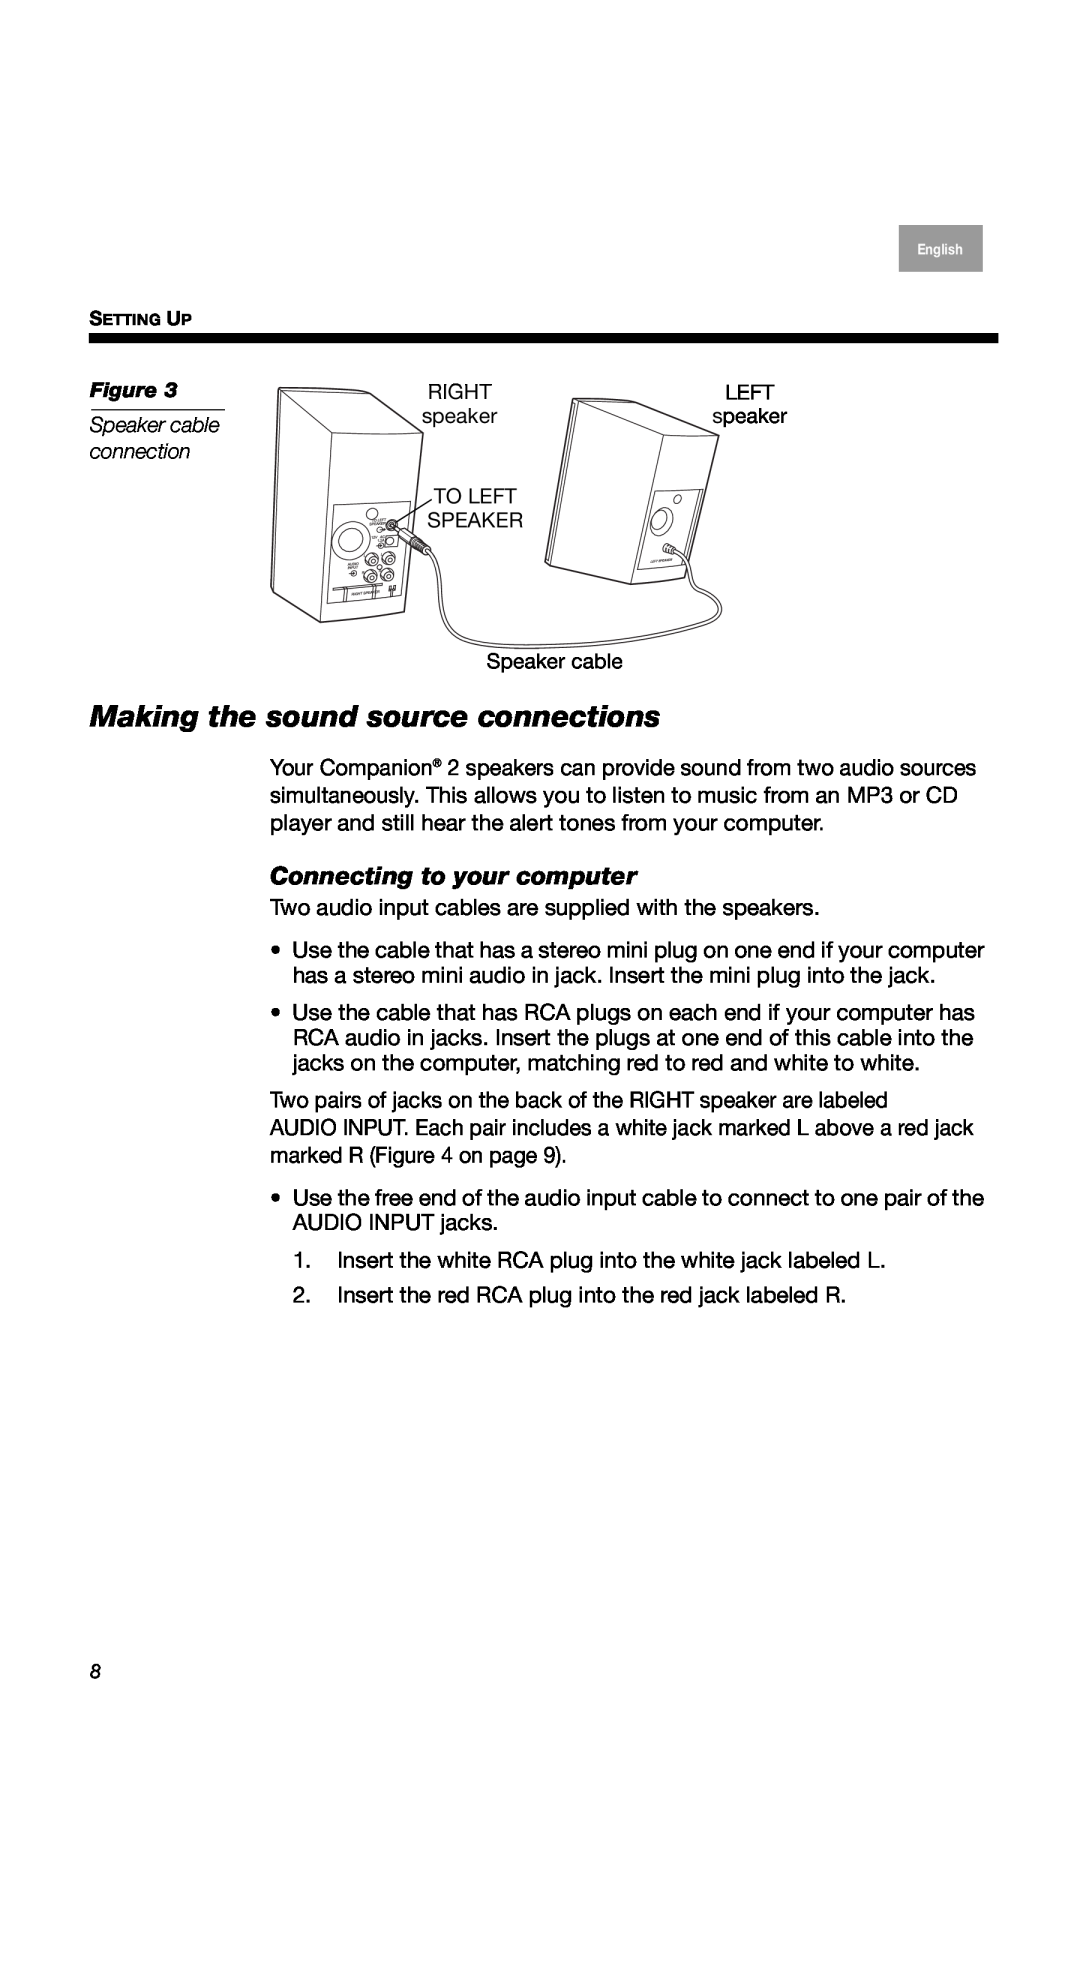 Bose 2 Series II, 40274, COMPANION2II manual Making the sound source connections, Connecting to your computer 